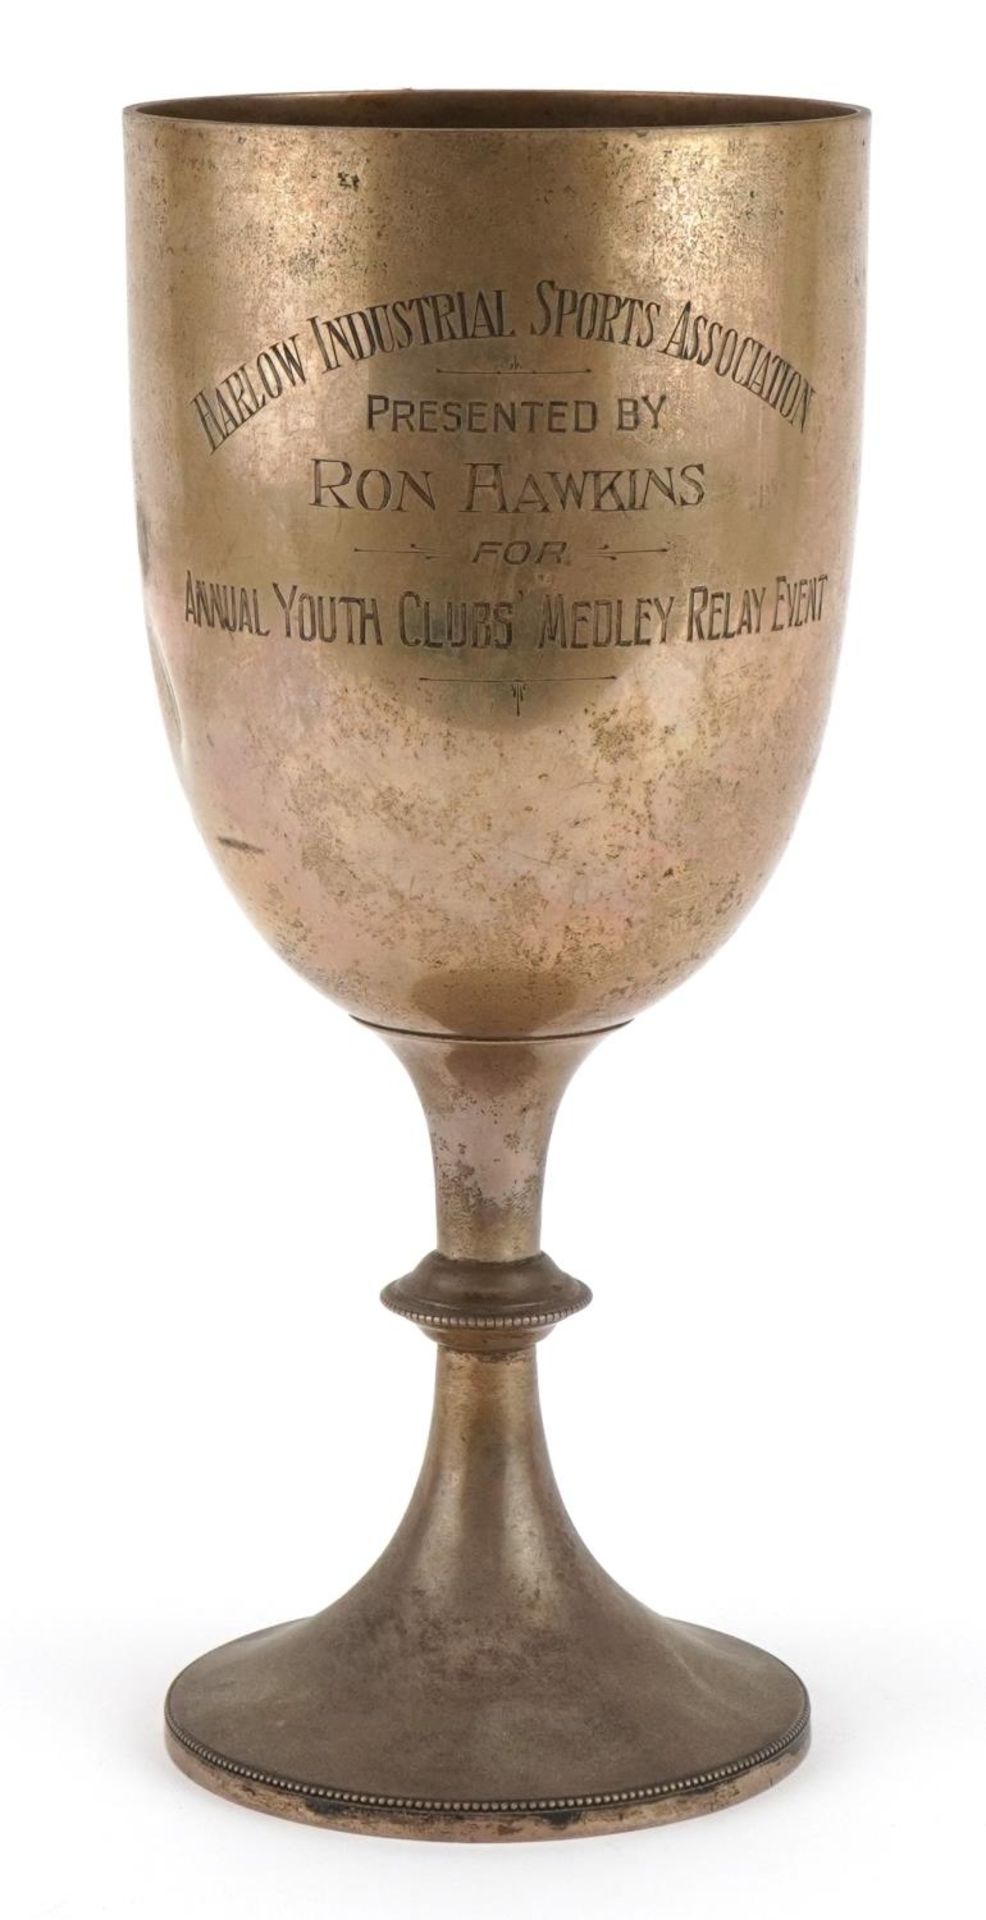 Harrison Brothers & Howson, large Edwardian sports trophy engraved Harlow Industrial Sports